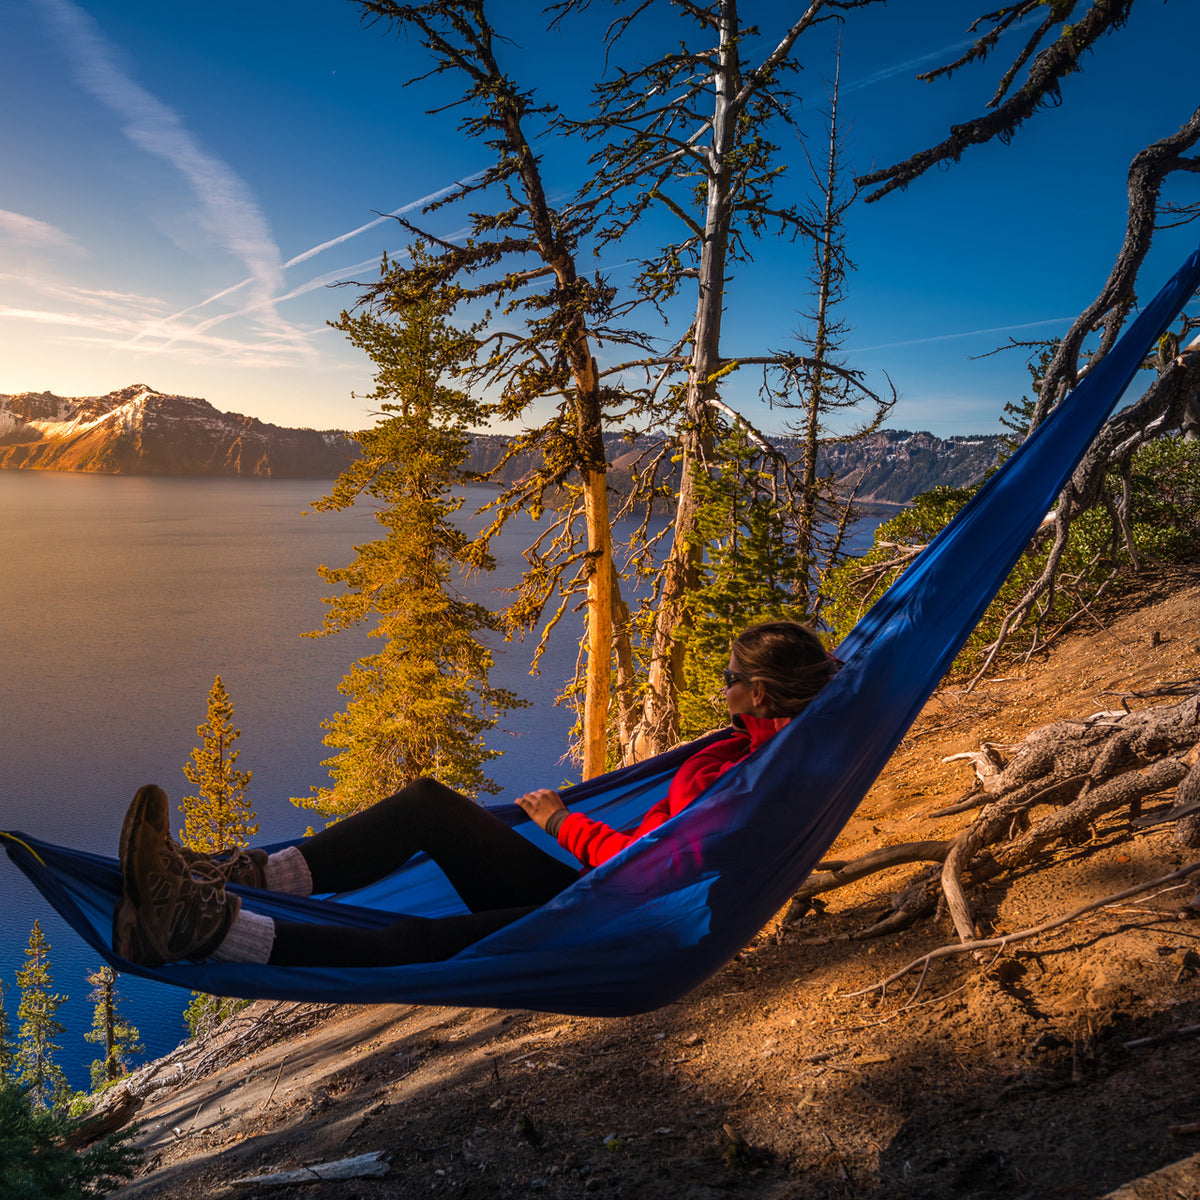 Woman relaxing outside in a Bliss Hammocks 54-inch Extra Wide To Go Hammock in a Bag next to a lake on the edge of a cliff. It's a clear day with mountains in the background.